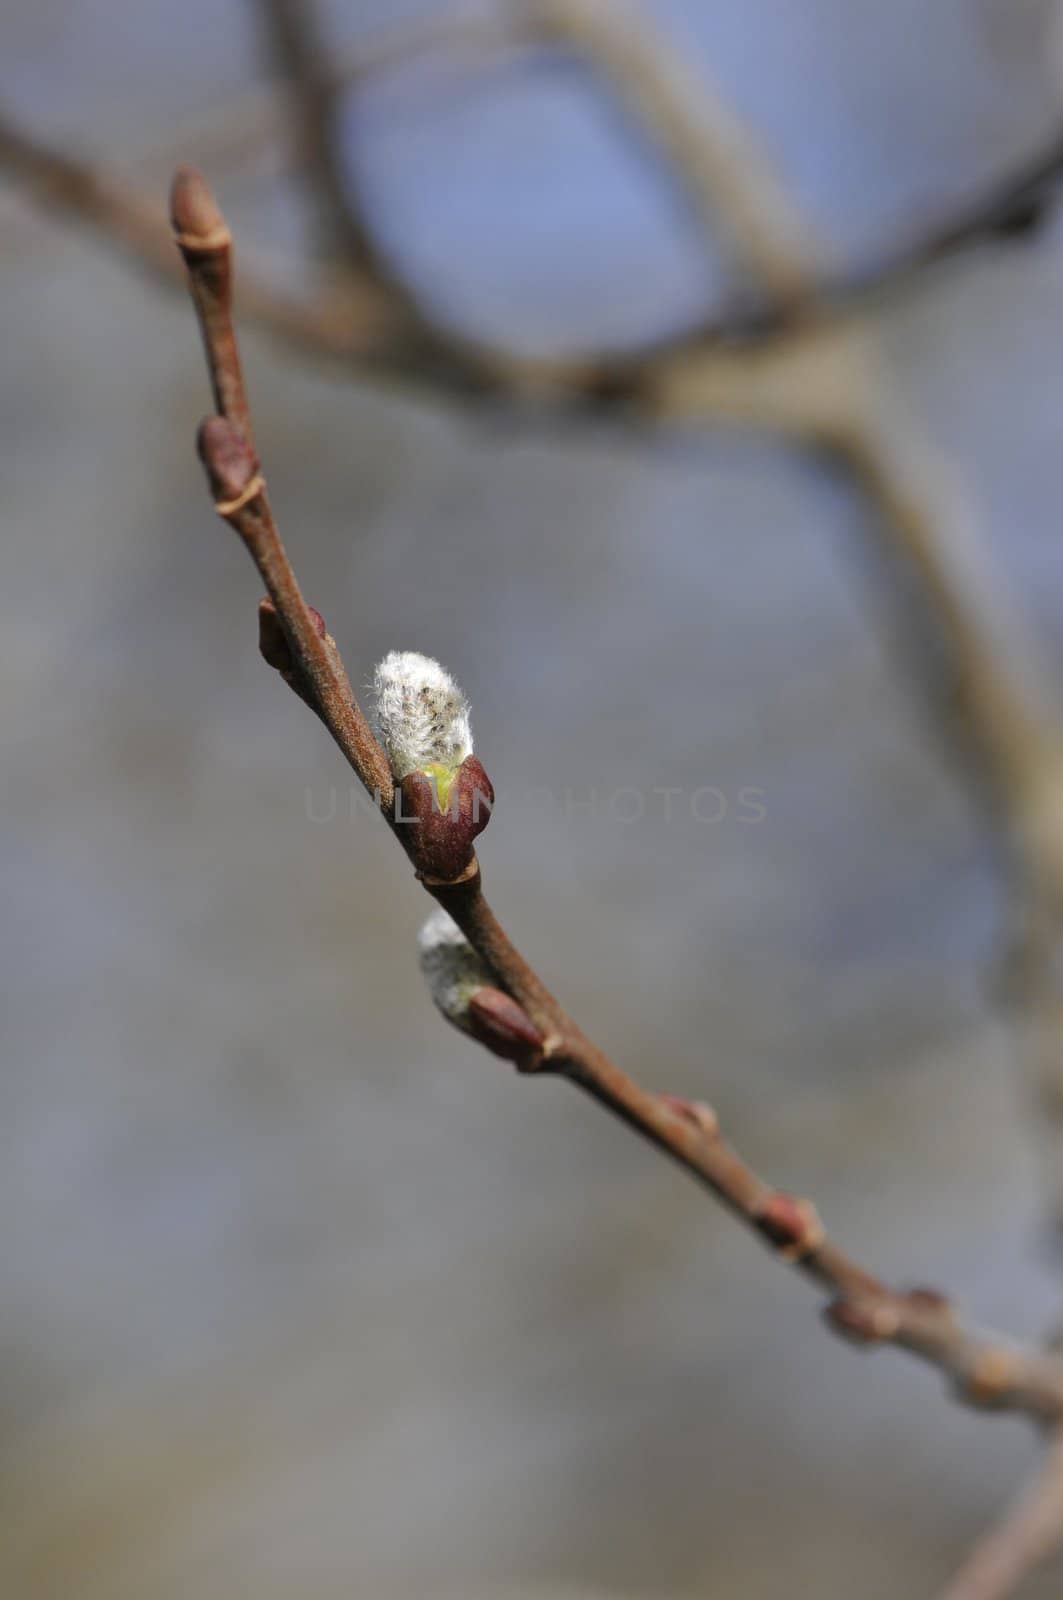 One young bud on a small branch by shkyo30